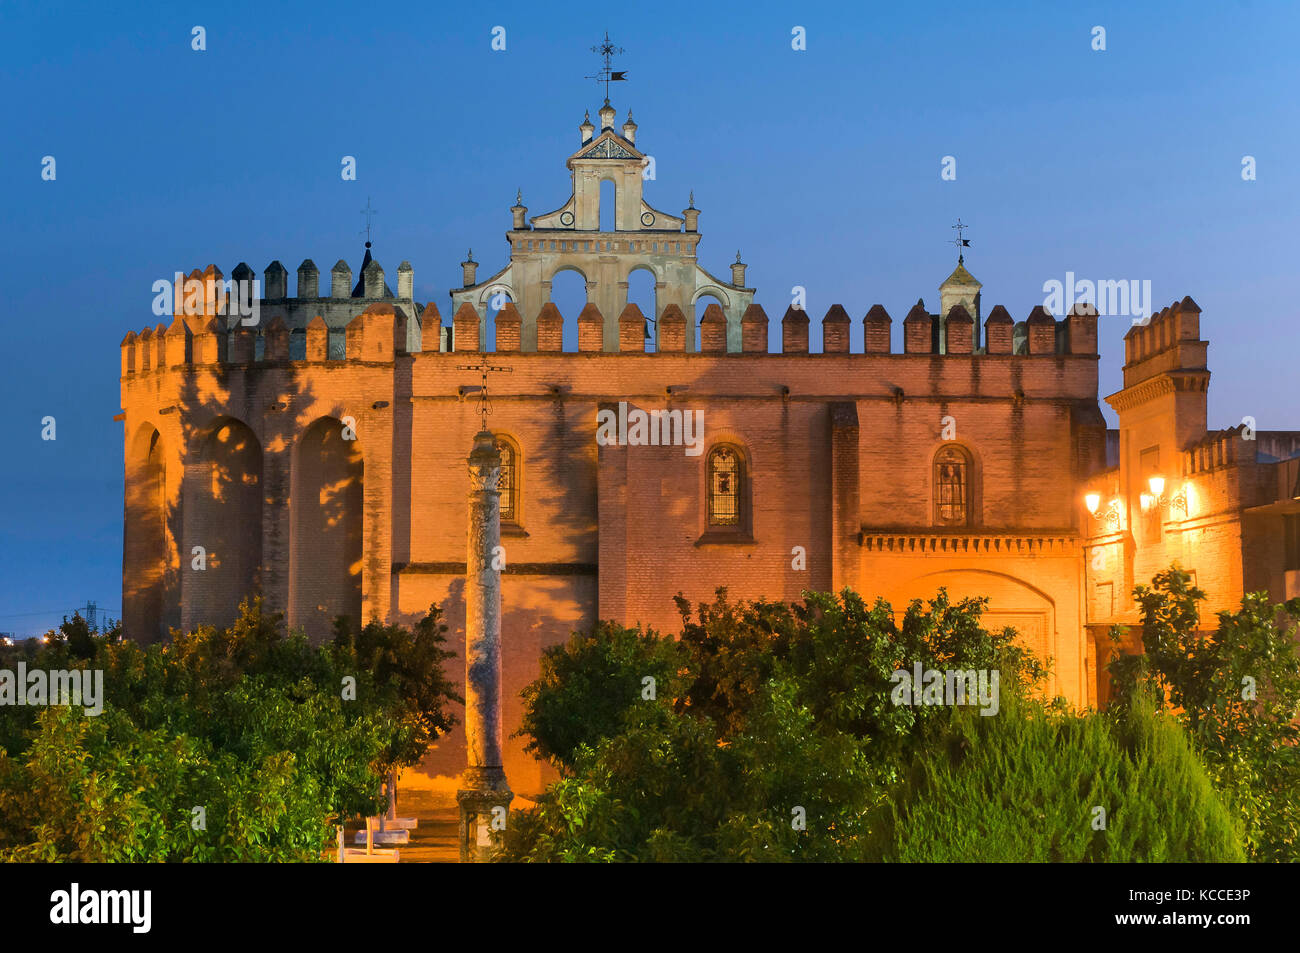 Monastery of San Isidoro del Campo at dusk - founded in 1301, Santiponce, Sevilla province, Region of Andalusia, Spain, Europe Stock Photo